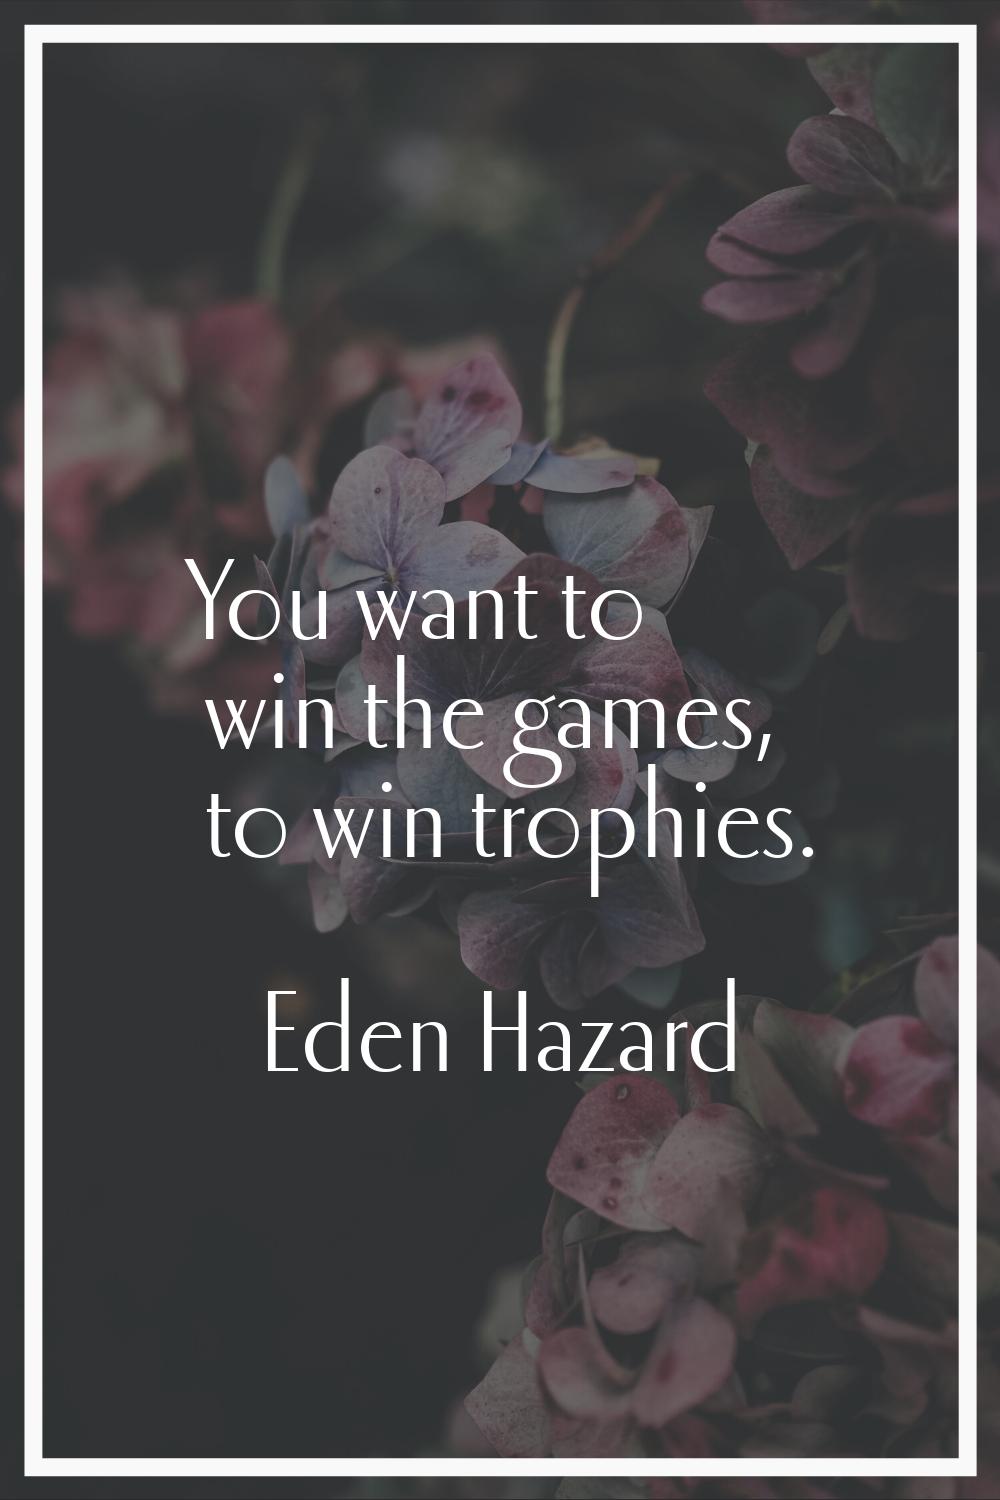 You want to win the games, to win trophies.